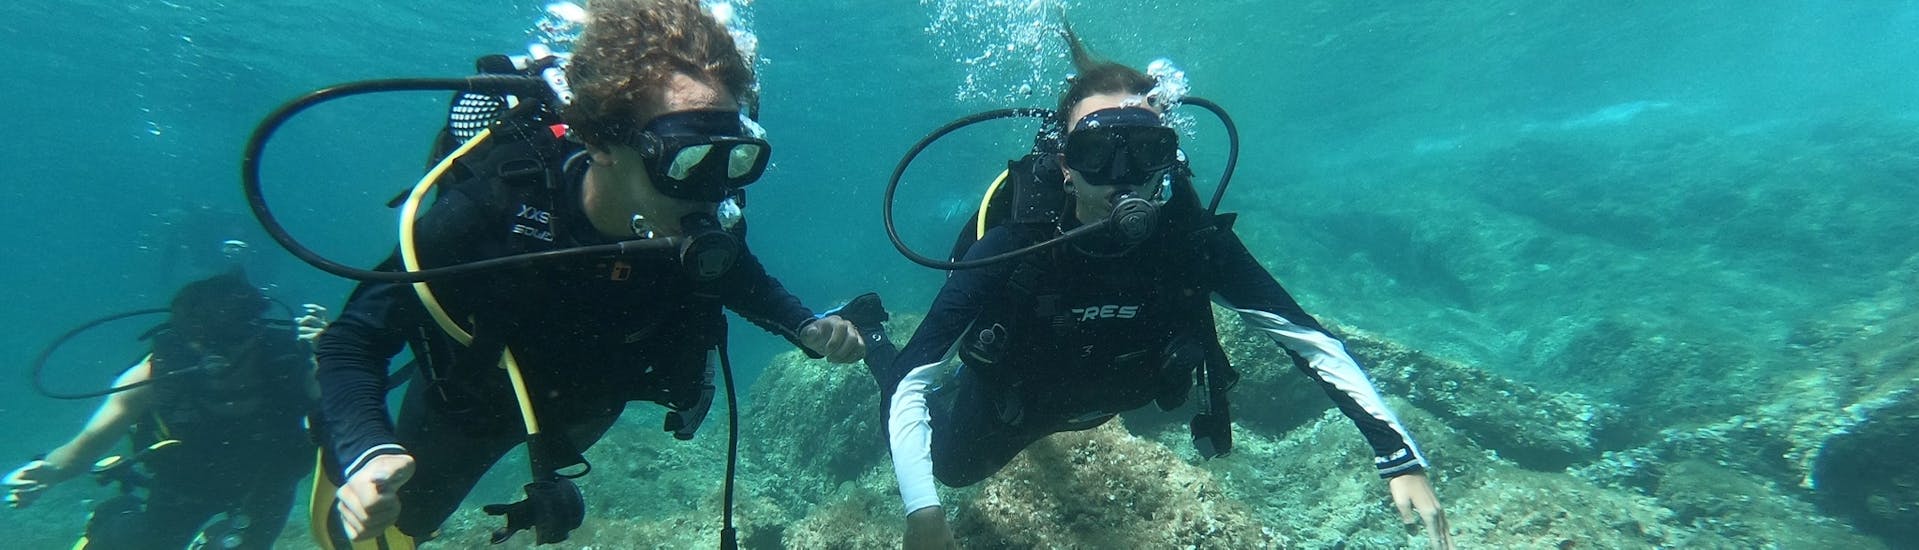 Two friends scuba diving in the blue waters of Mallorca during a PADI Discover Scuba Diving course with Albatros Diving in Cala Bona.